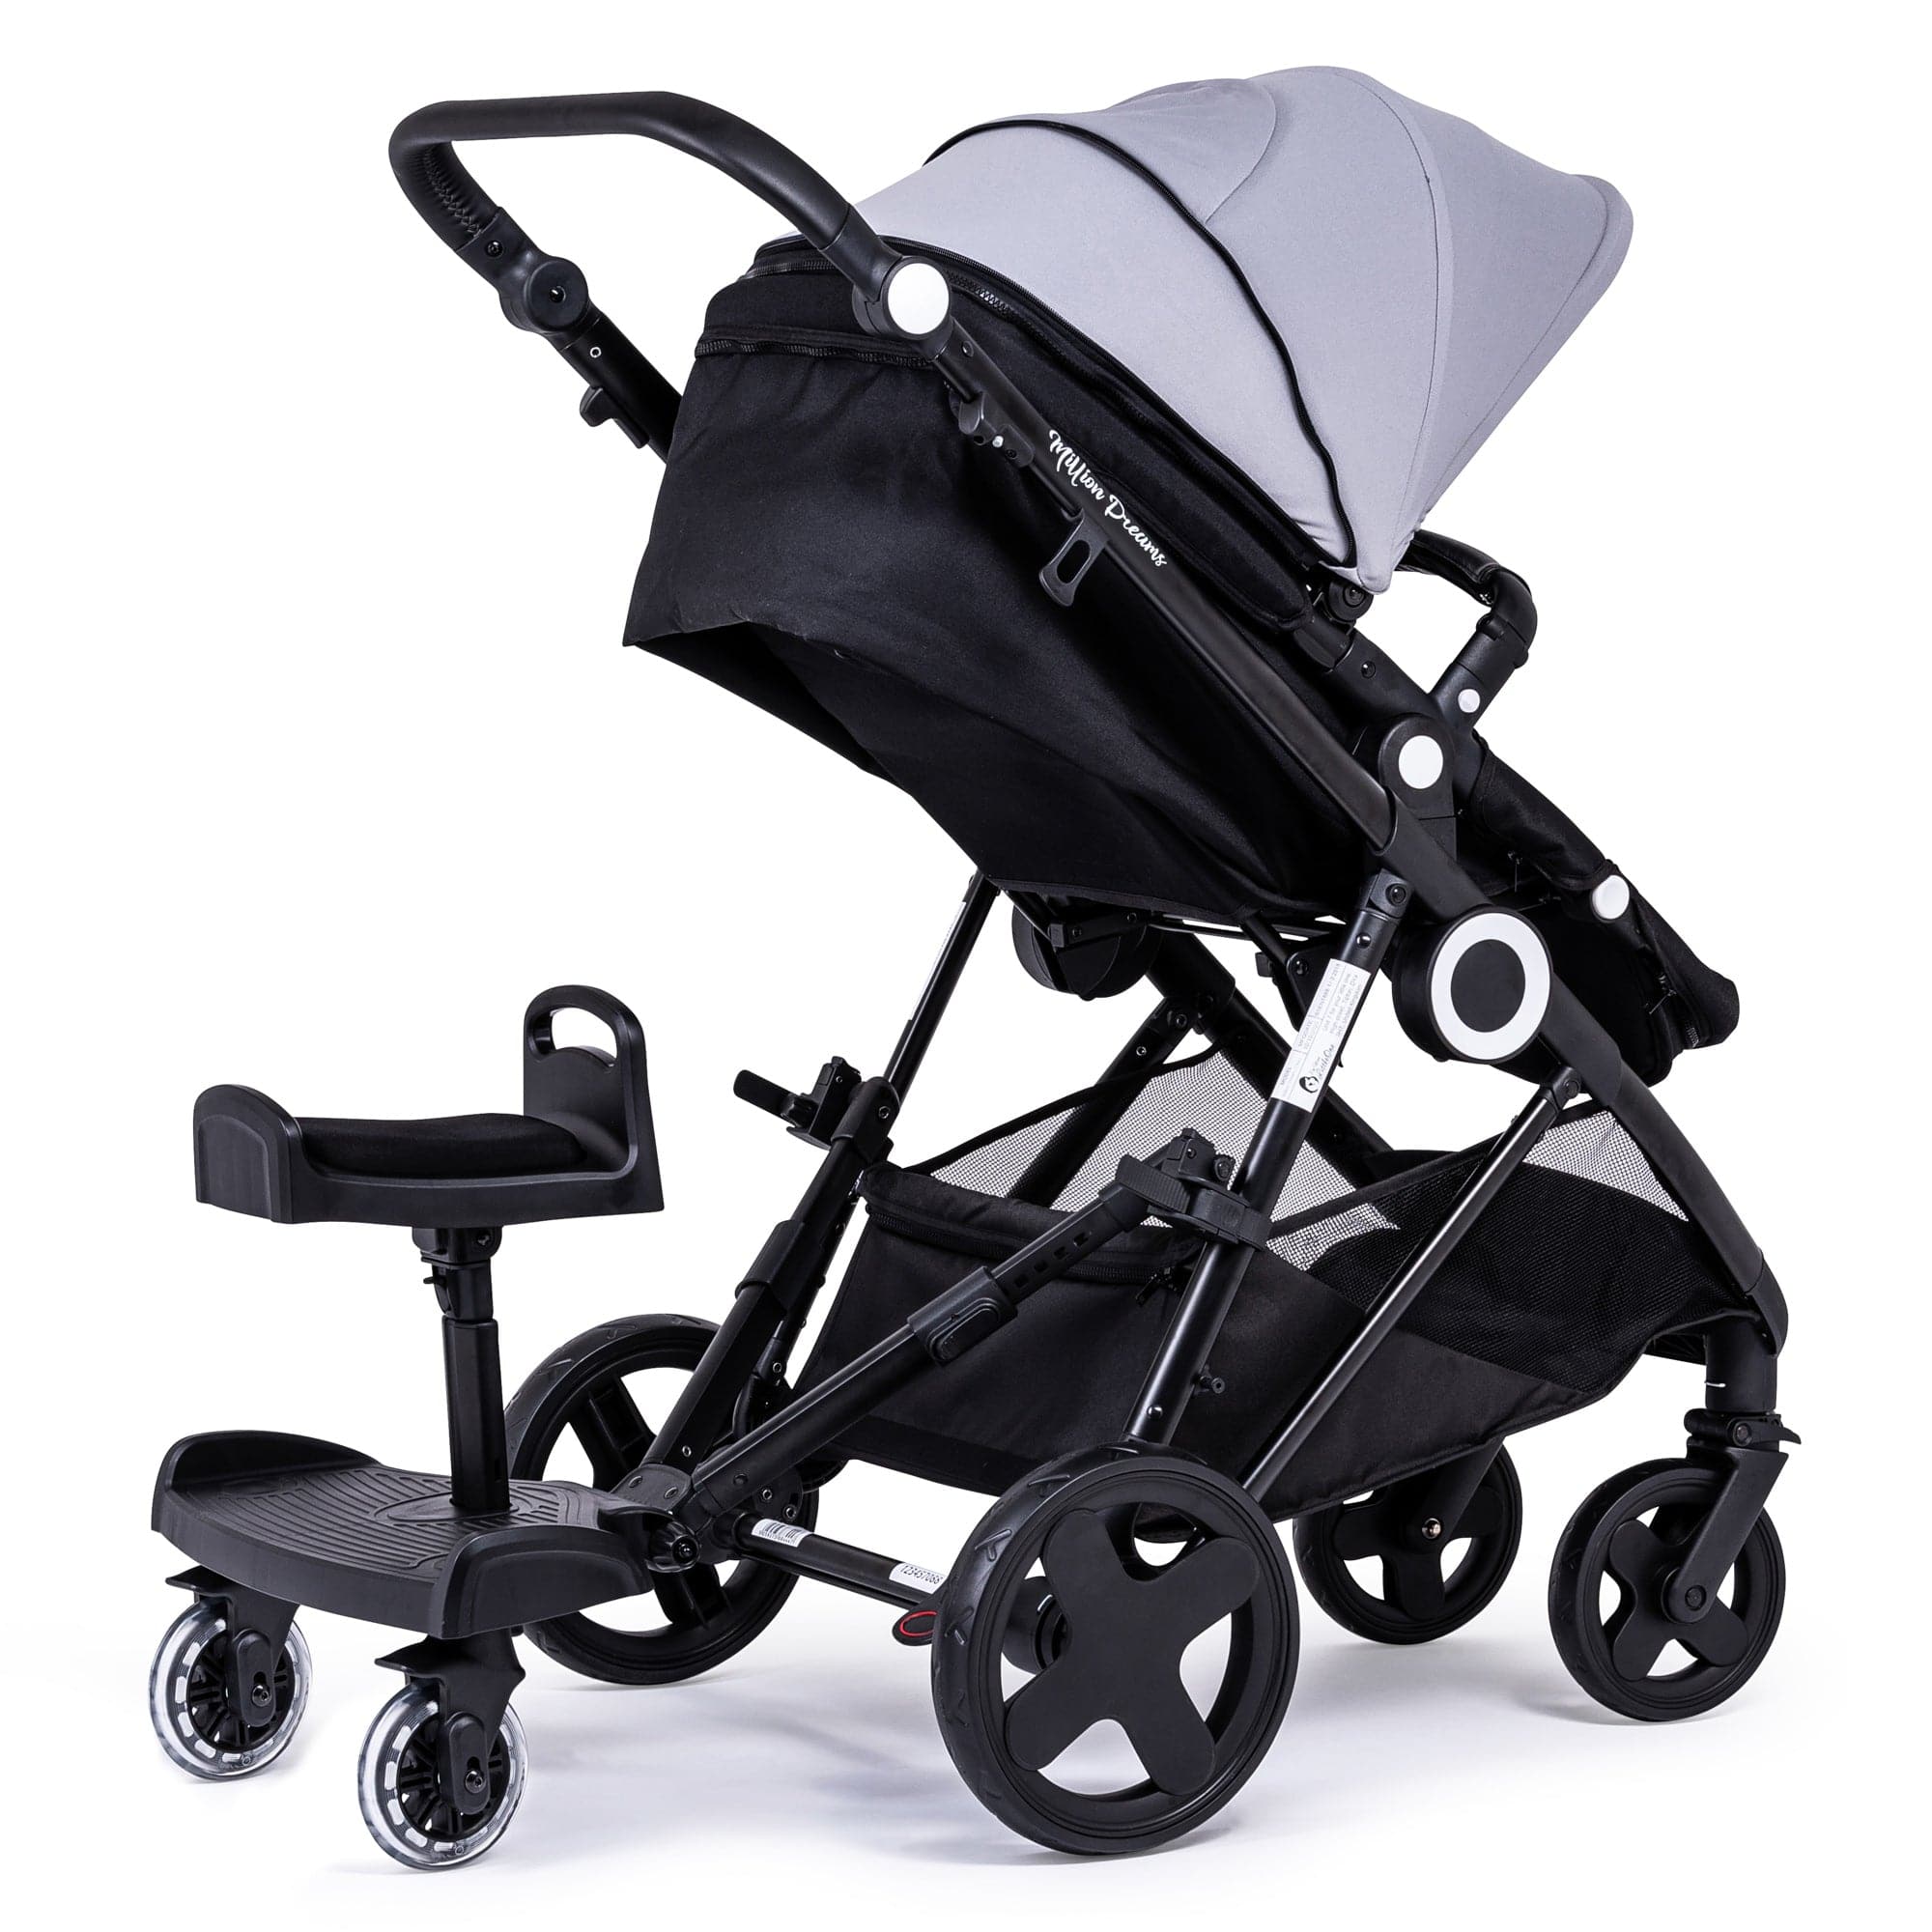 Ride On Board with Seat Compatible with Peg Perego - For Your Little One